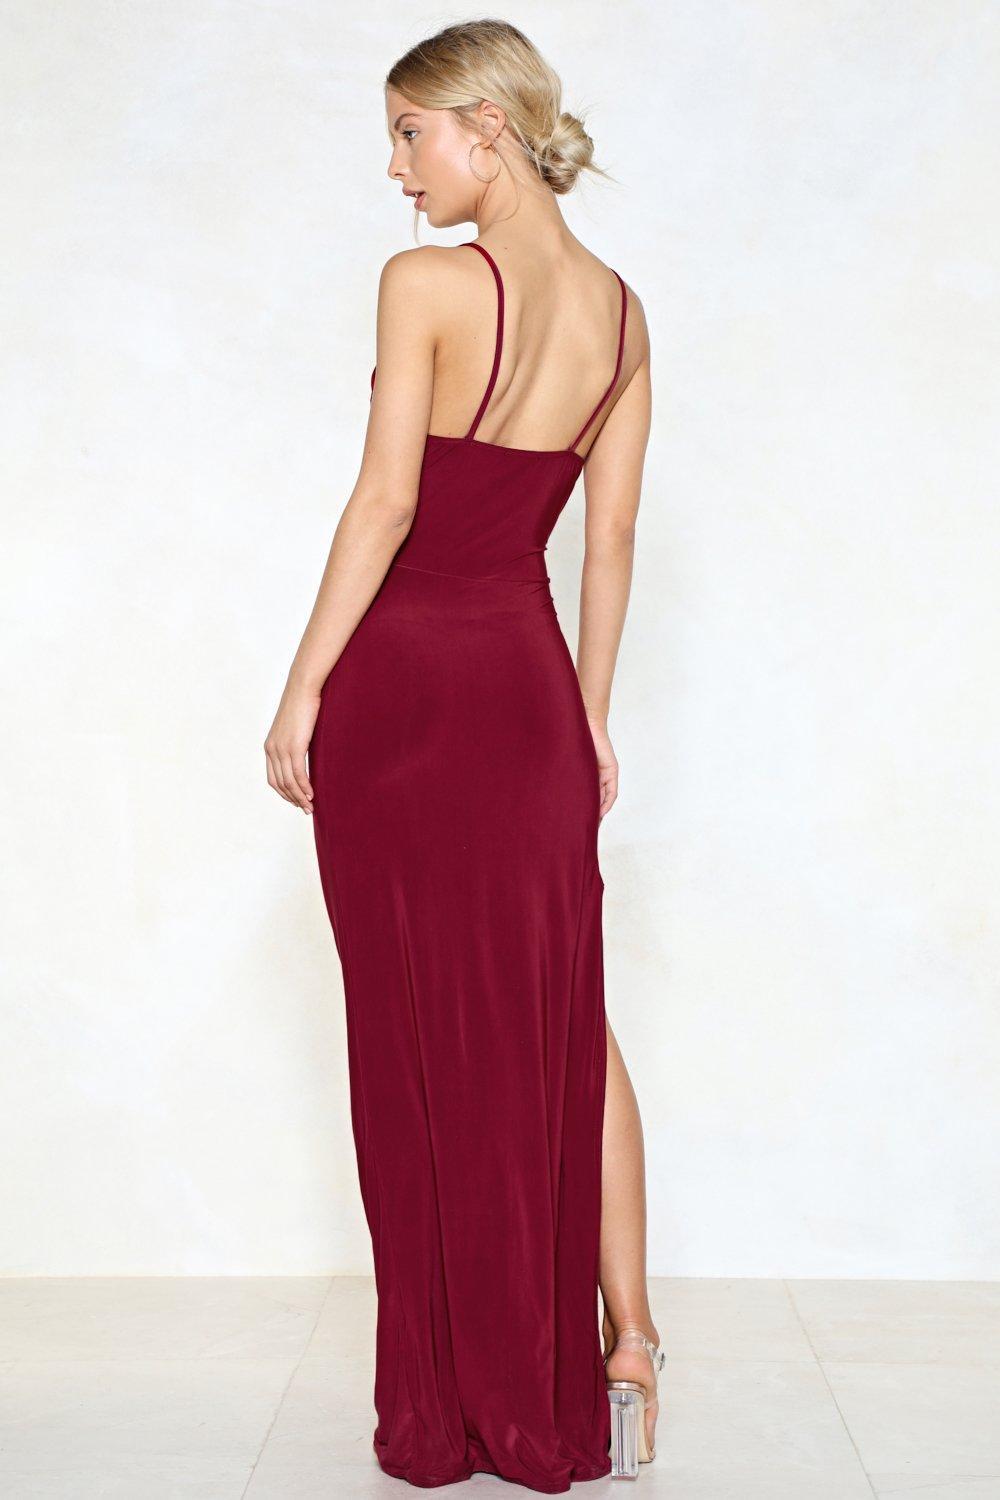 Lyst - Nasty Gal Slit Or Miss Maxi Dress in Red